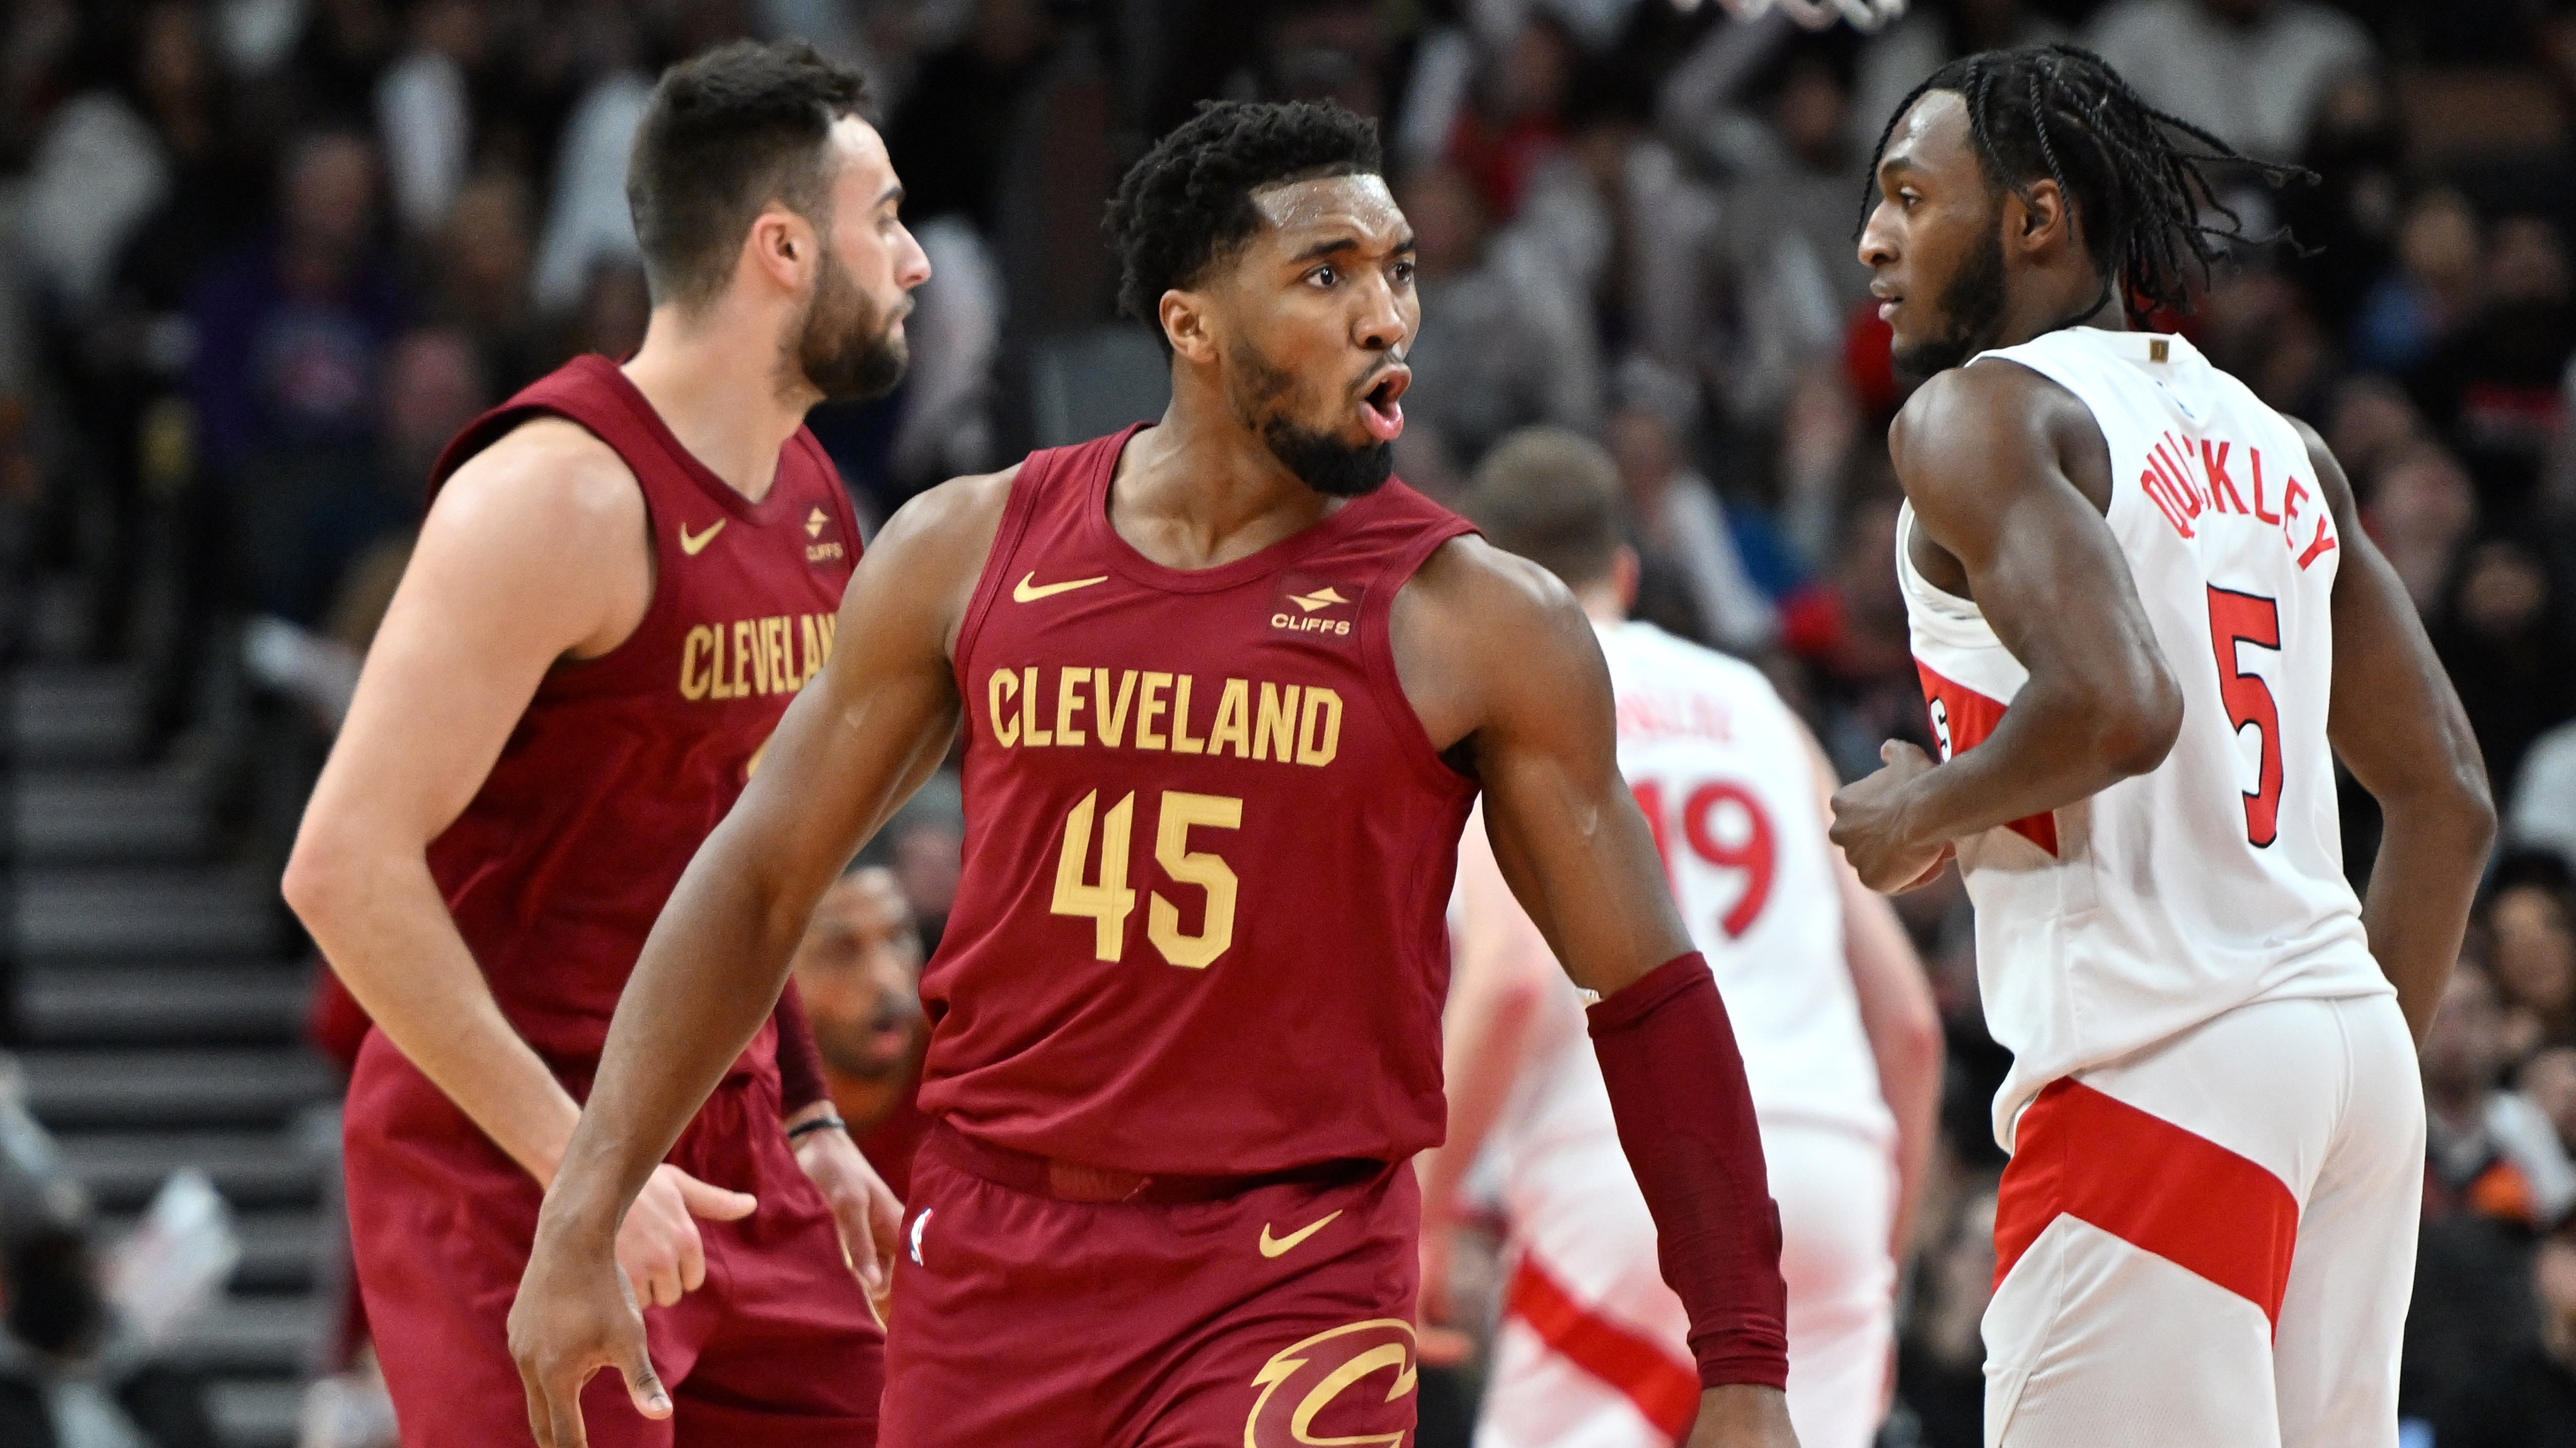 Cleveland Cavaliers guard Donovan Mitchell reacts during a game against the Toronto Raptors.